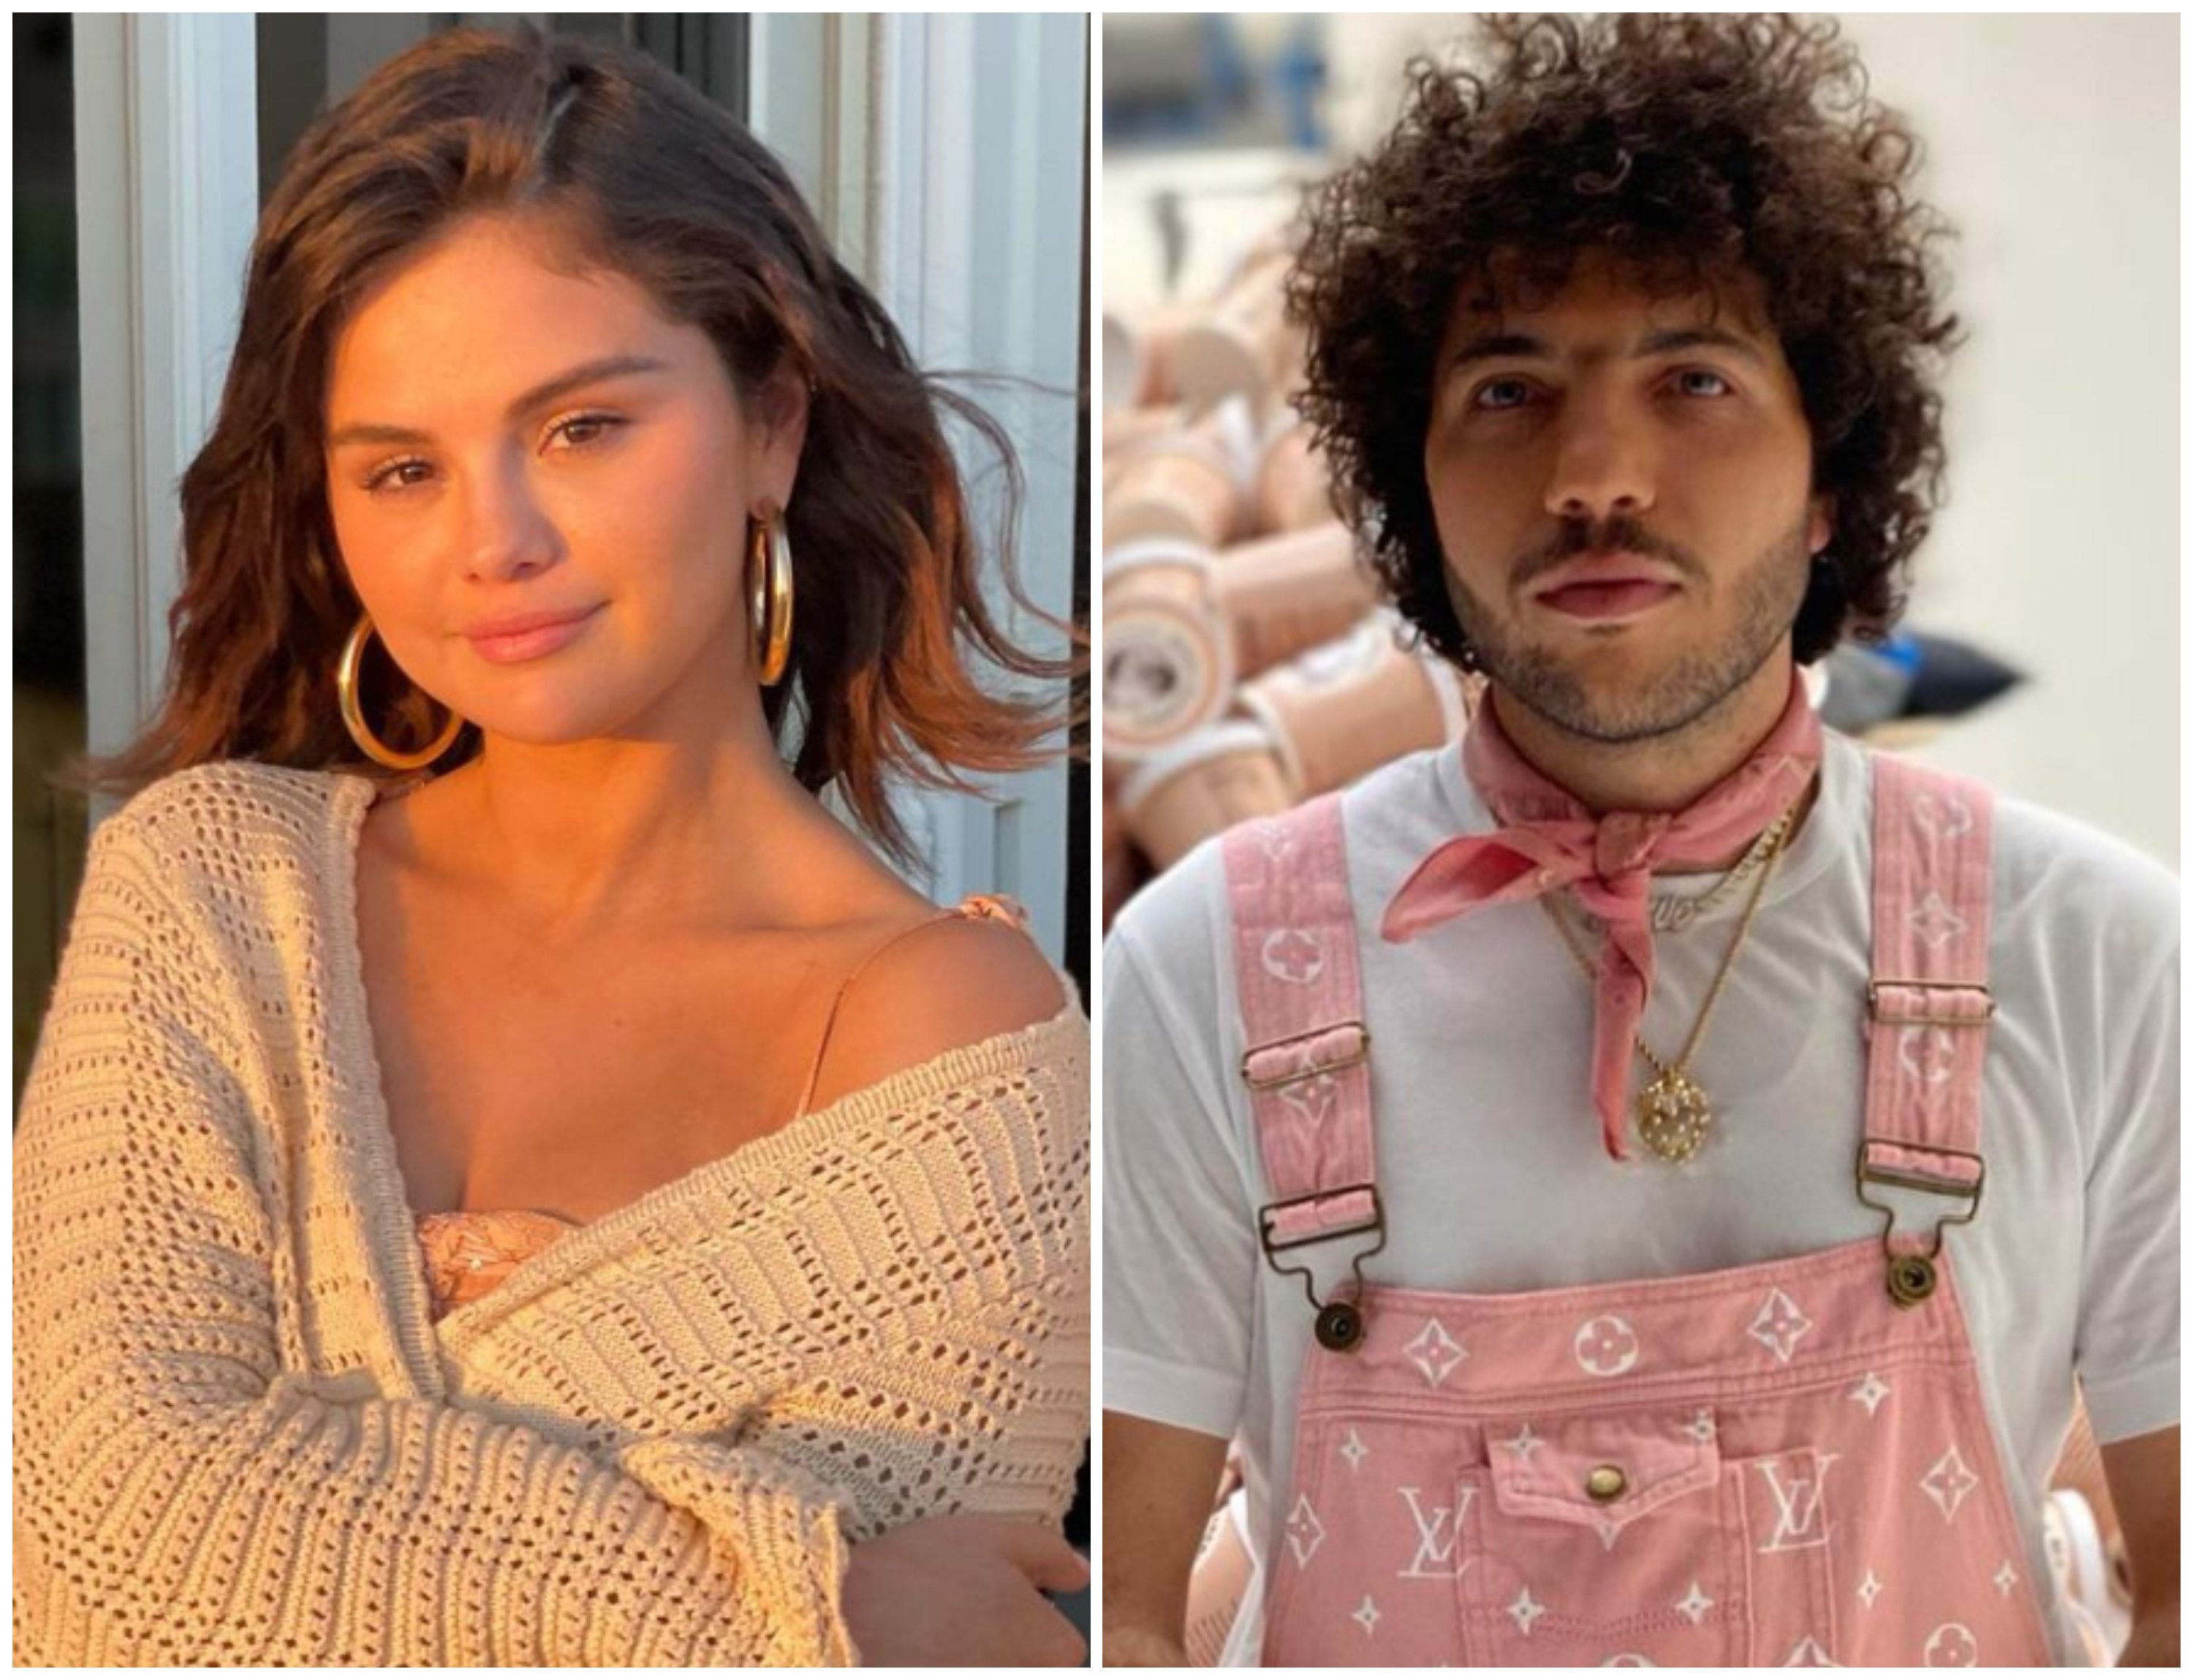 Selena Gomez just confirmed her new romance with music producer Benny Blanco – but not all of her fans are happy. Photos: @selenagomez, @itsbennyblanco/Instagram